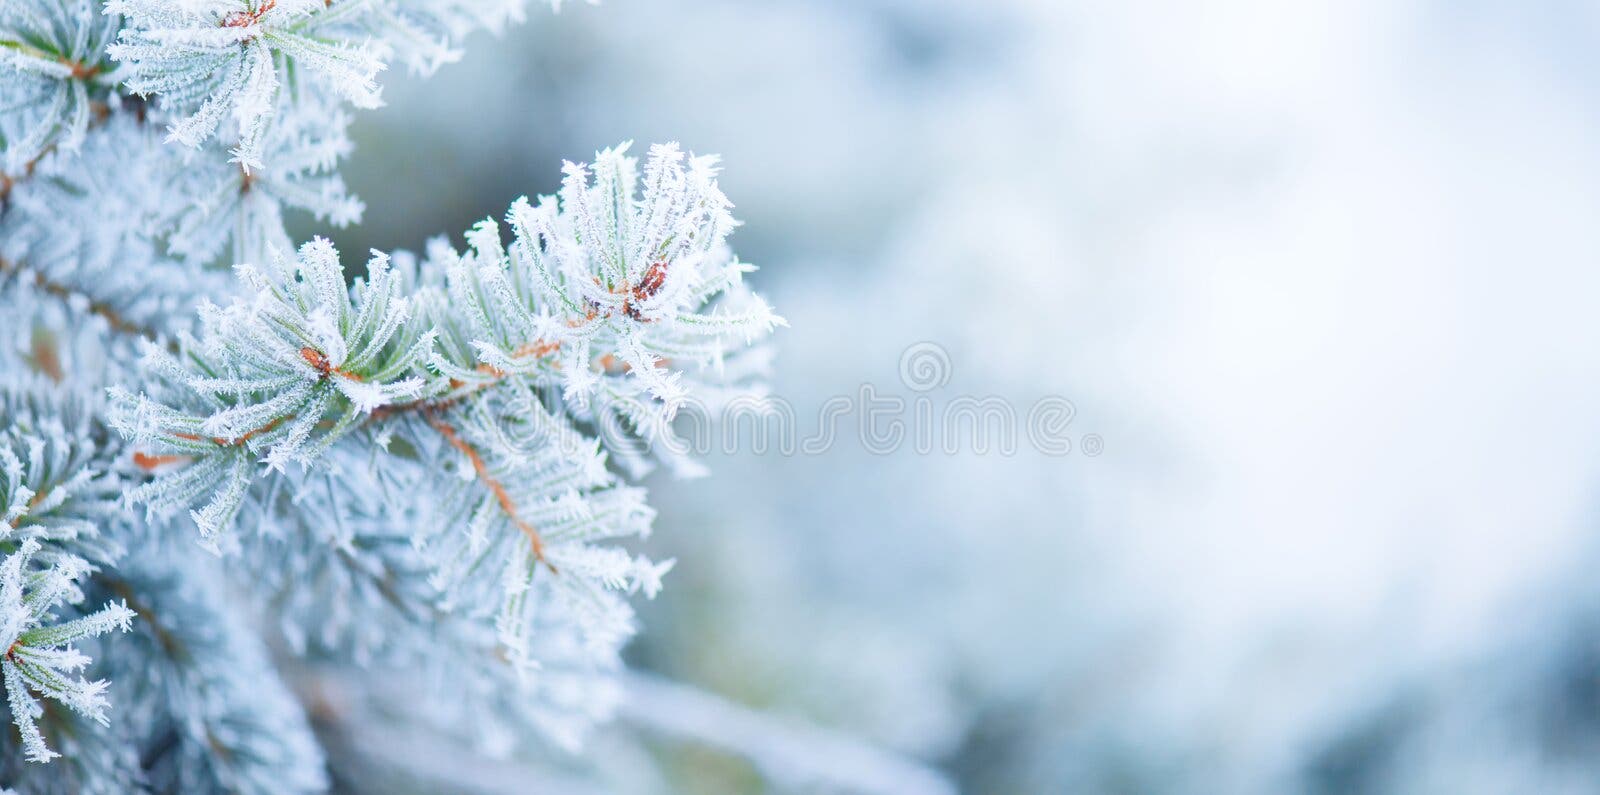 Winter Stock Photos, Royalty Free Winter Images